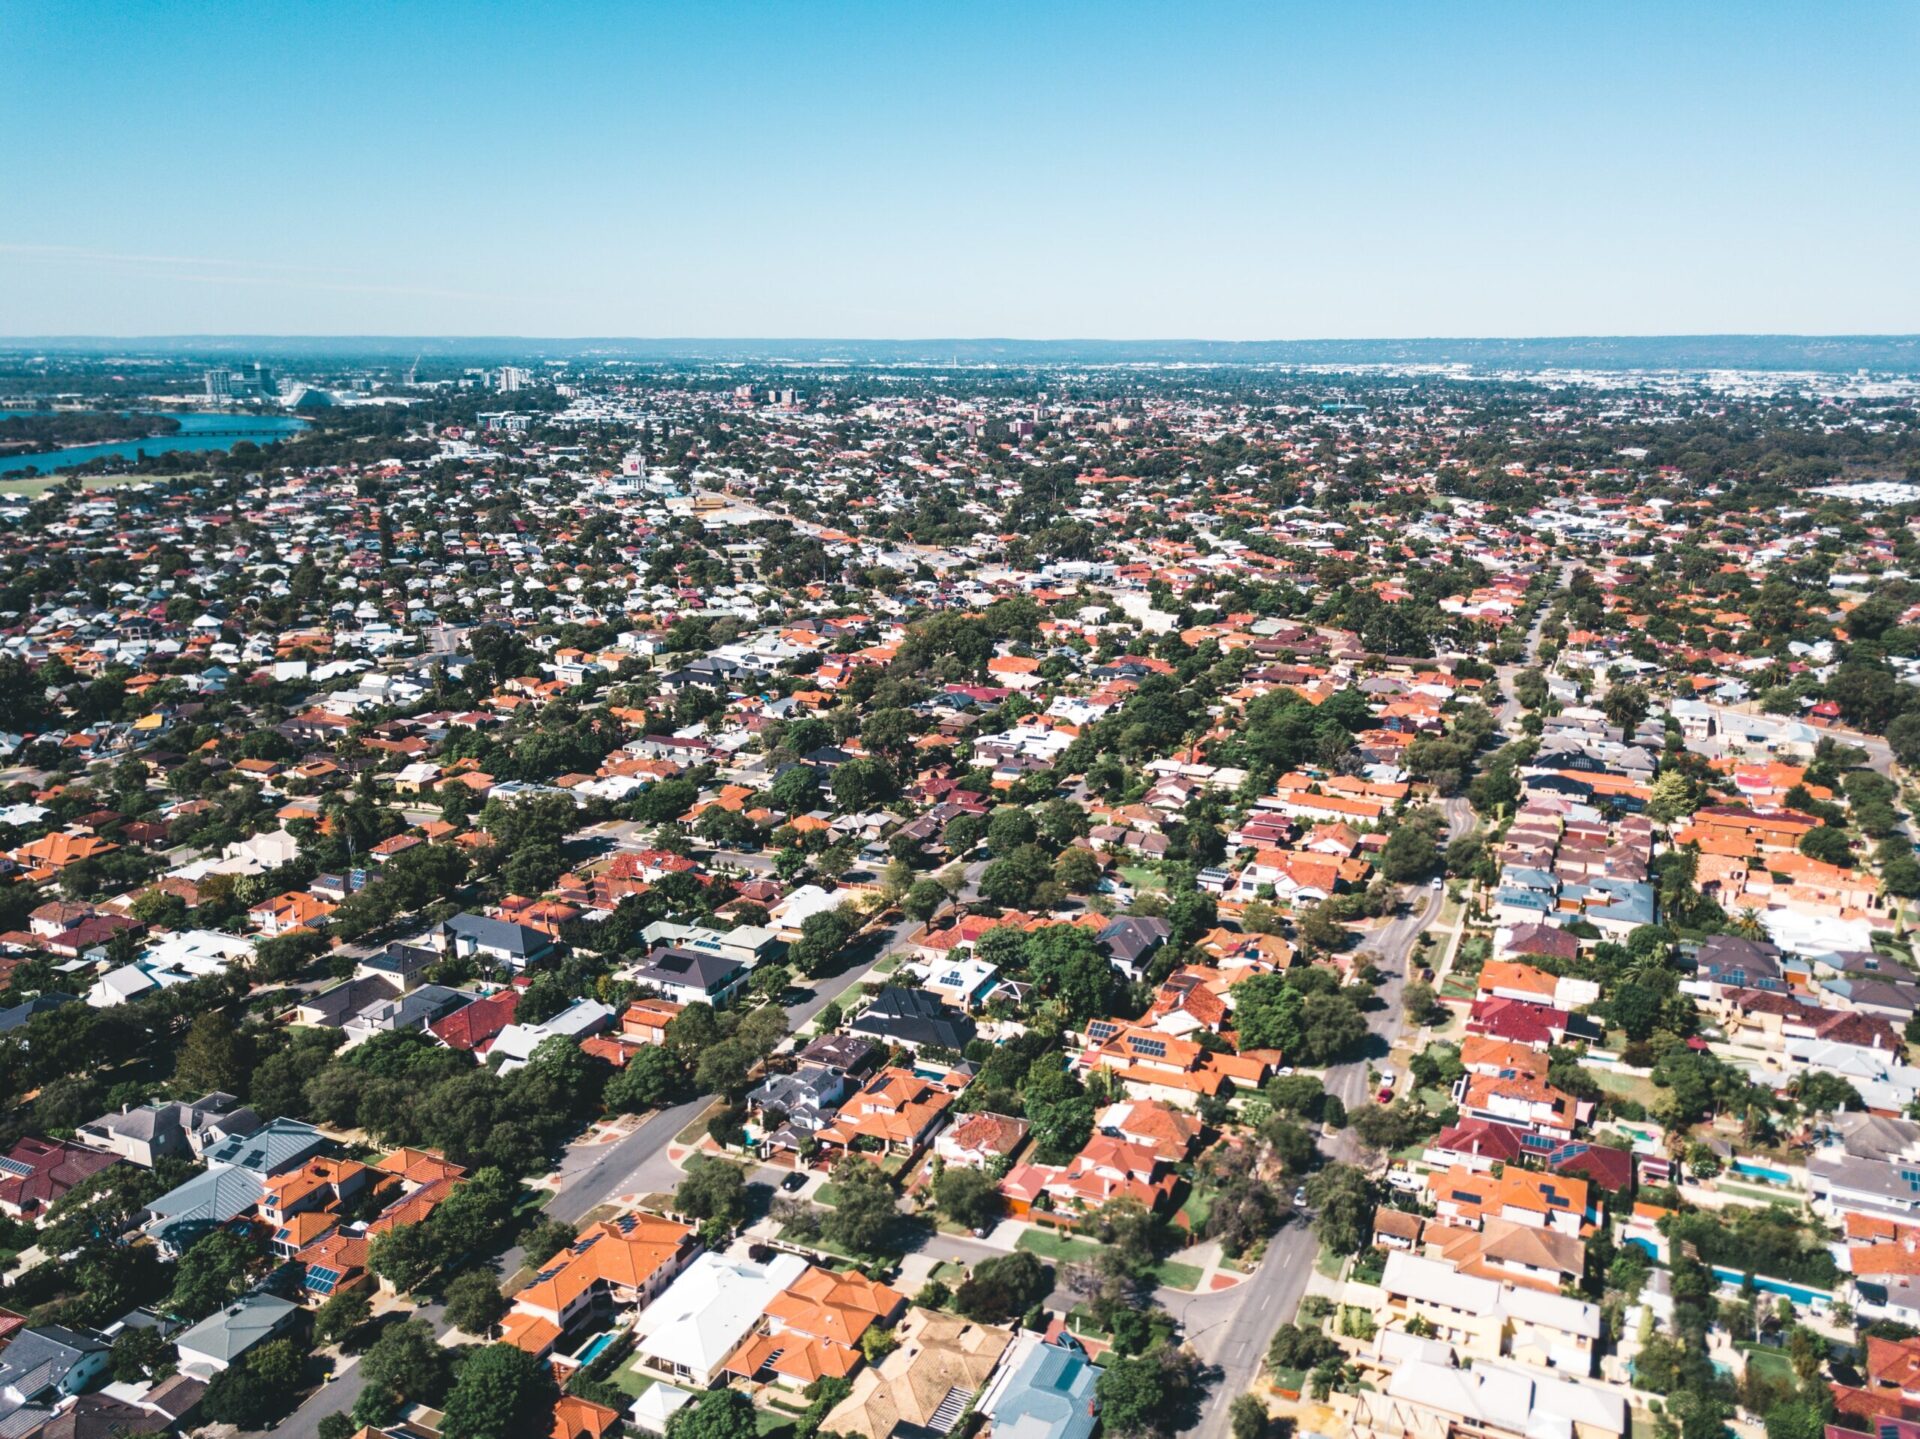 Australia Experiences Its Highest Housing Market Value in 17 Years